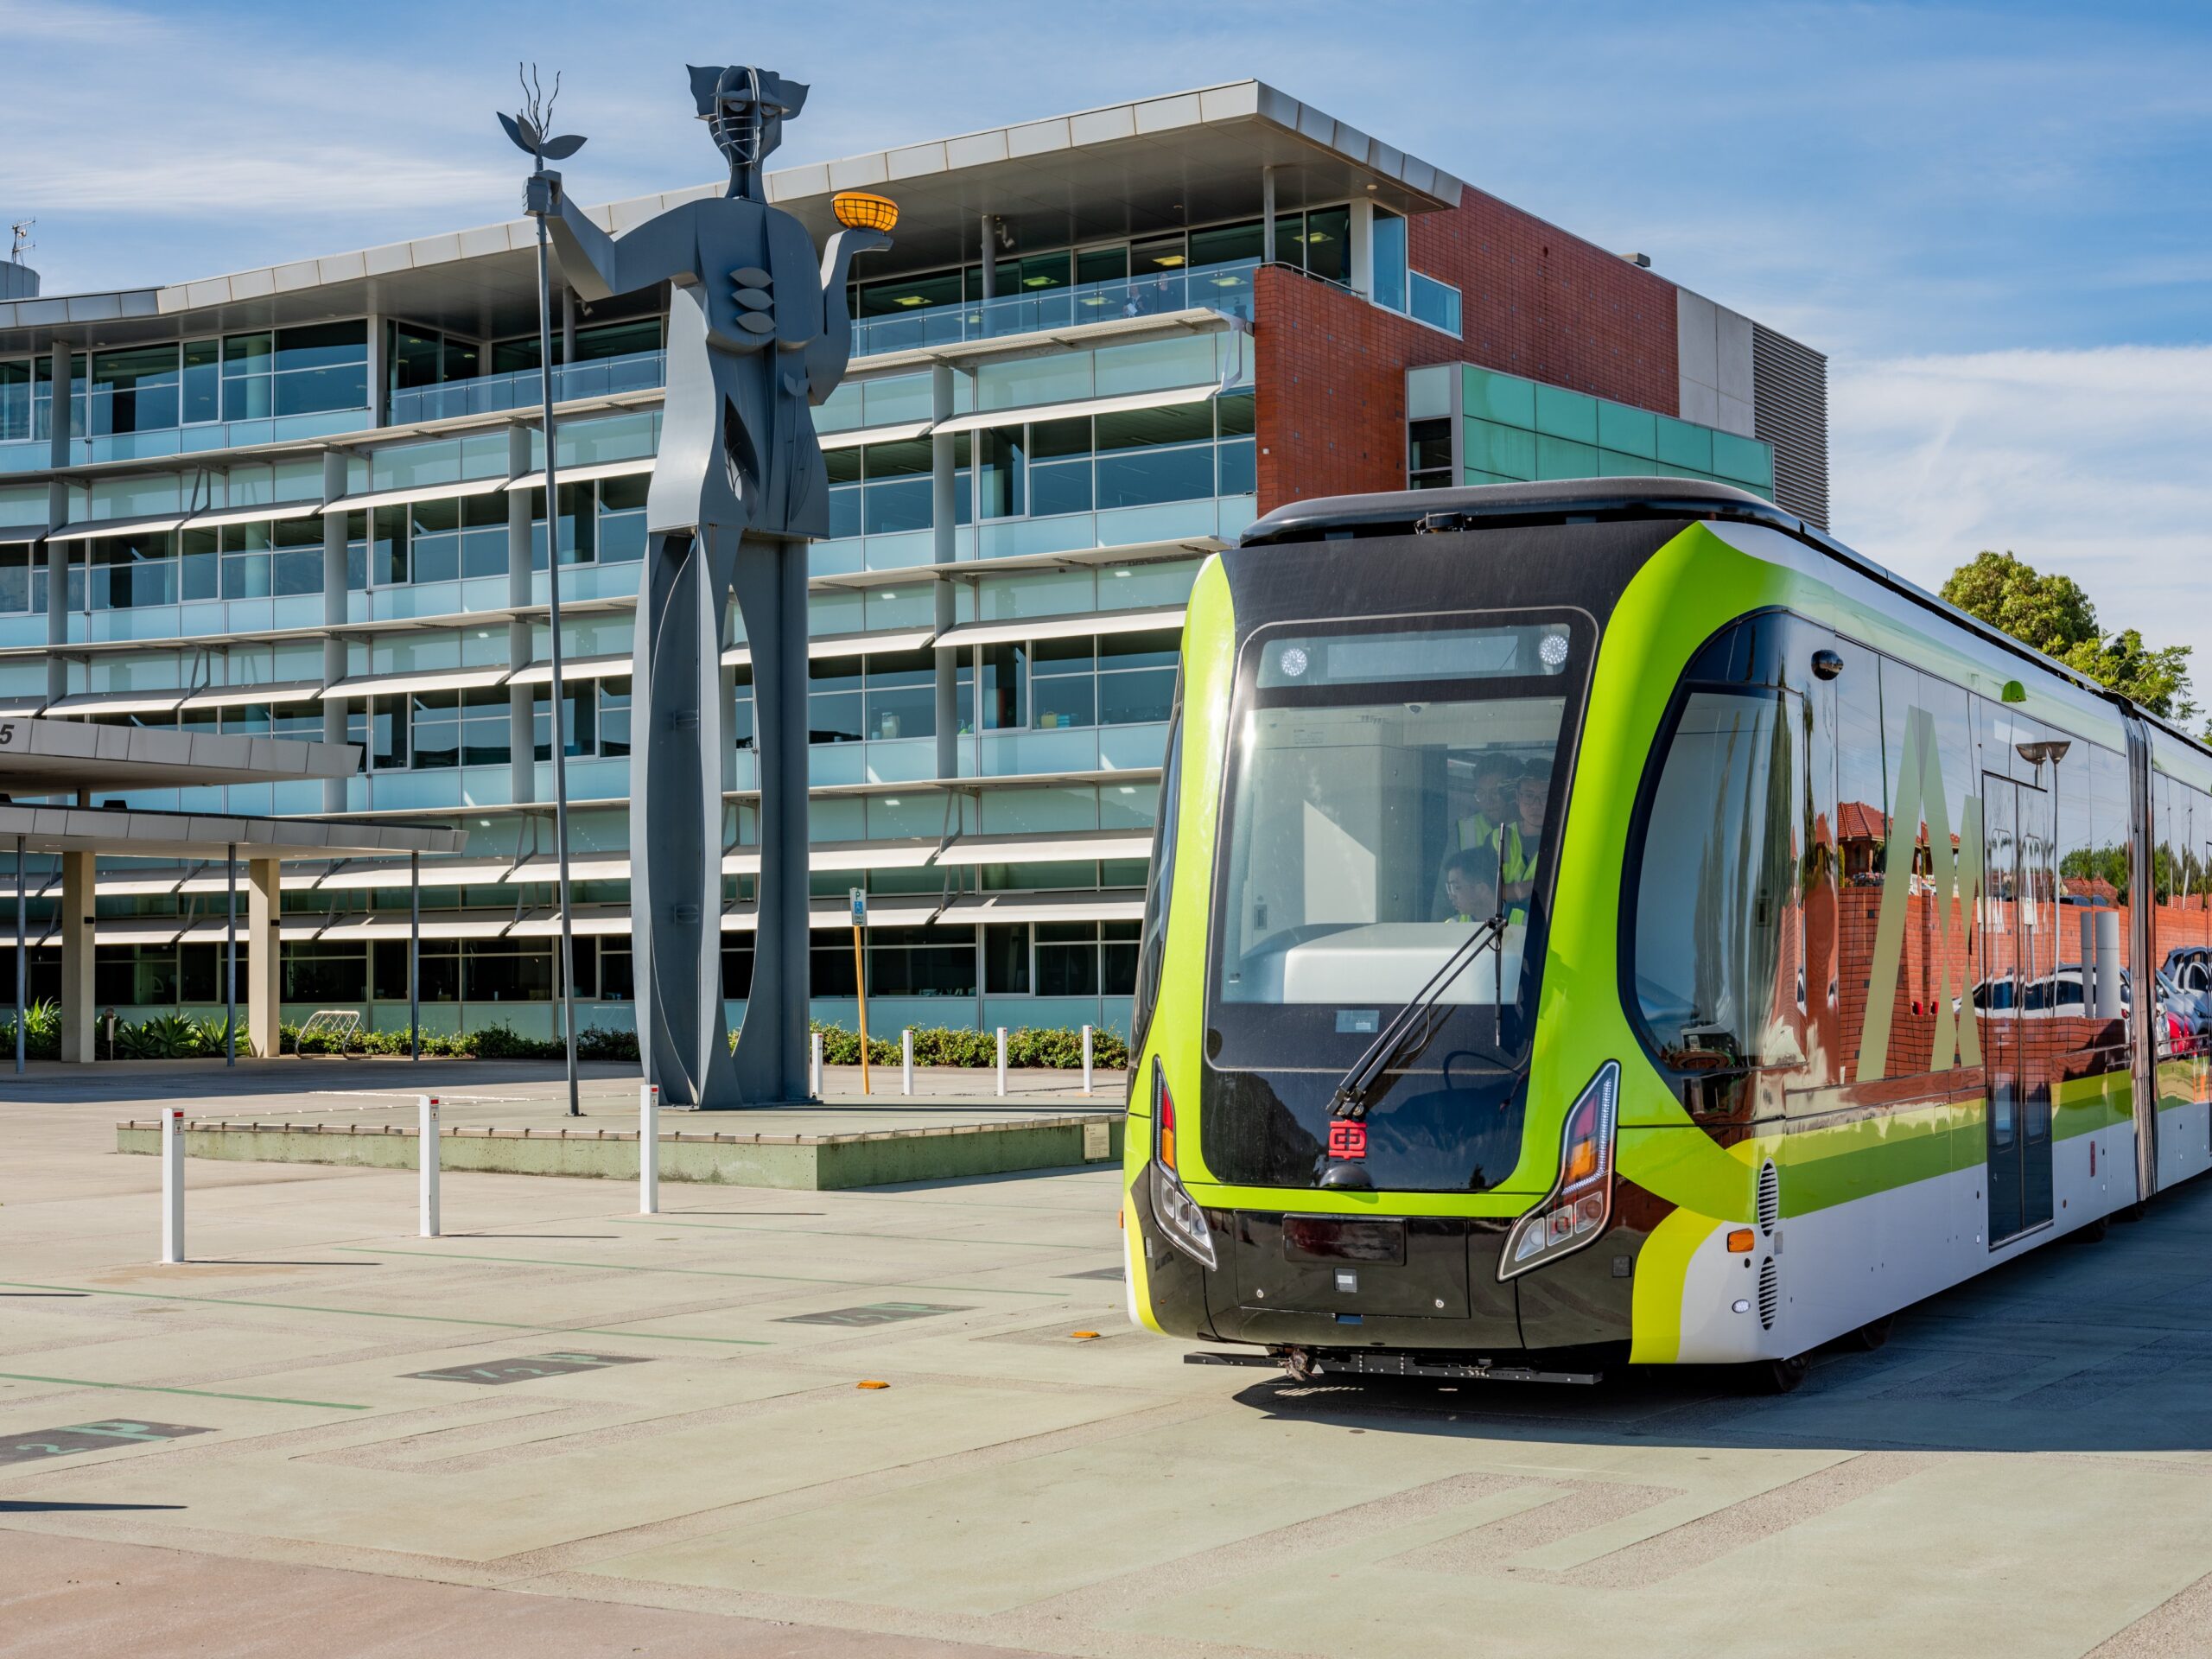 The 'Trackless Tram' has been manufactured by  CRRC and is on loan from China